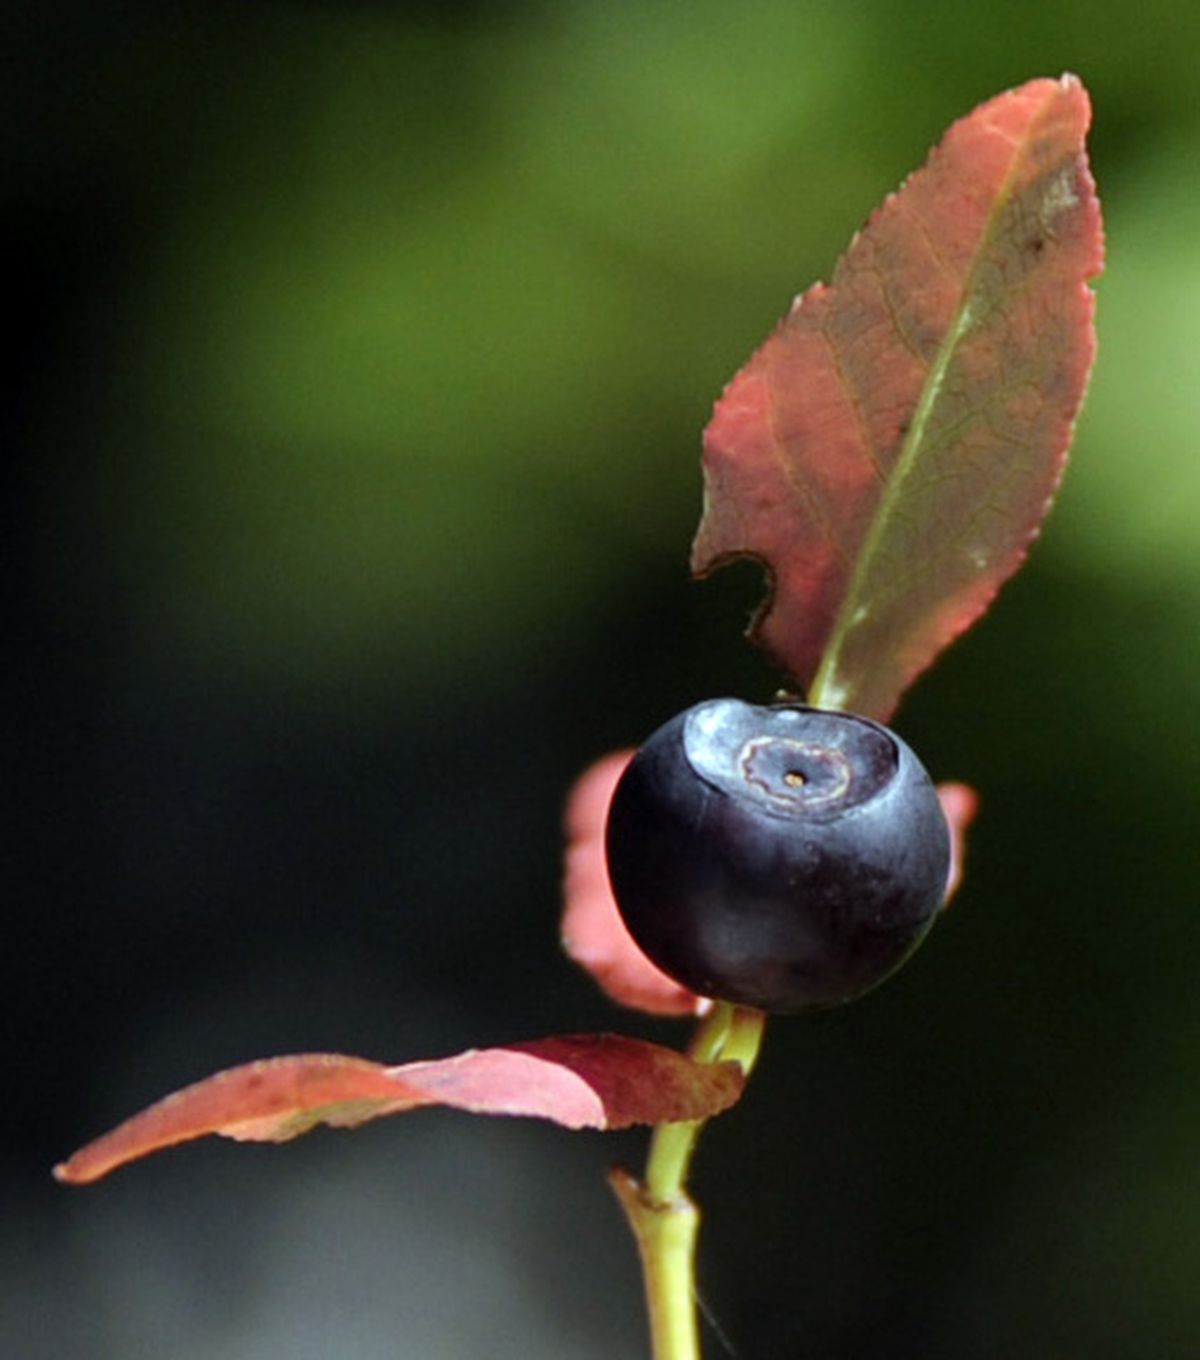 Fading into fall, the 2009 huckleberry crop is likely to be recalled with great reverence. (Jesse Tinsley / The Spokesman-Review)